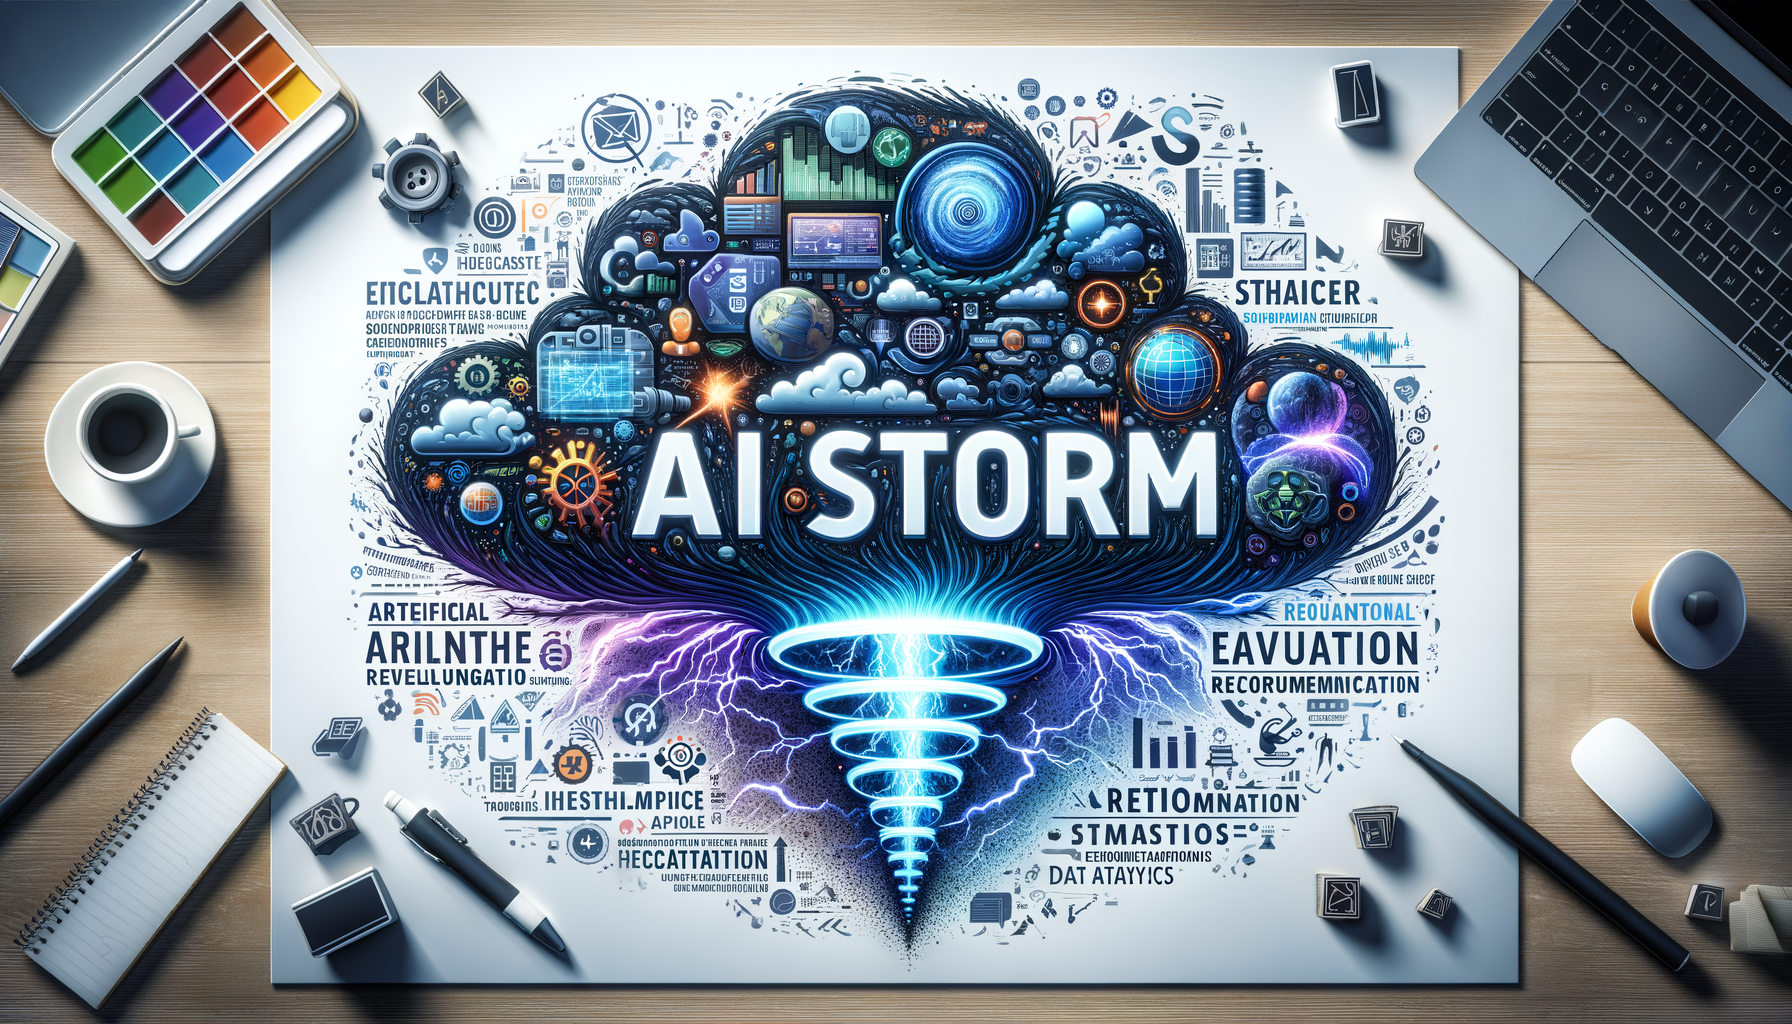 “Riding the AI Storm: Transforming Businesses and Daily Life”